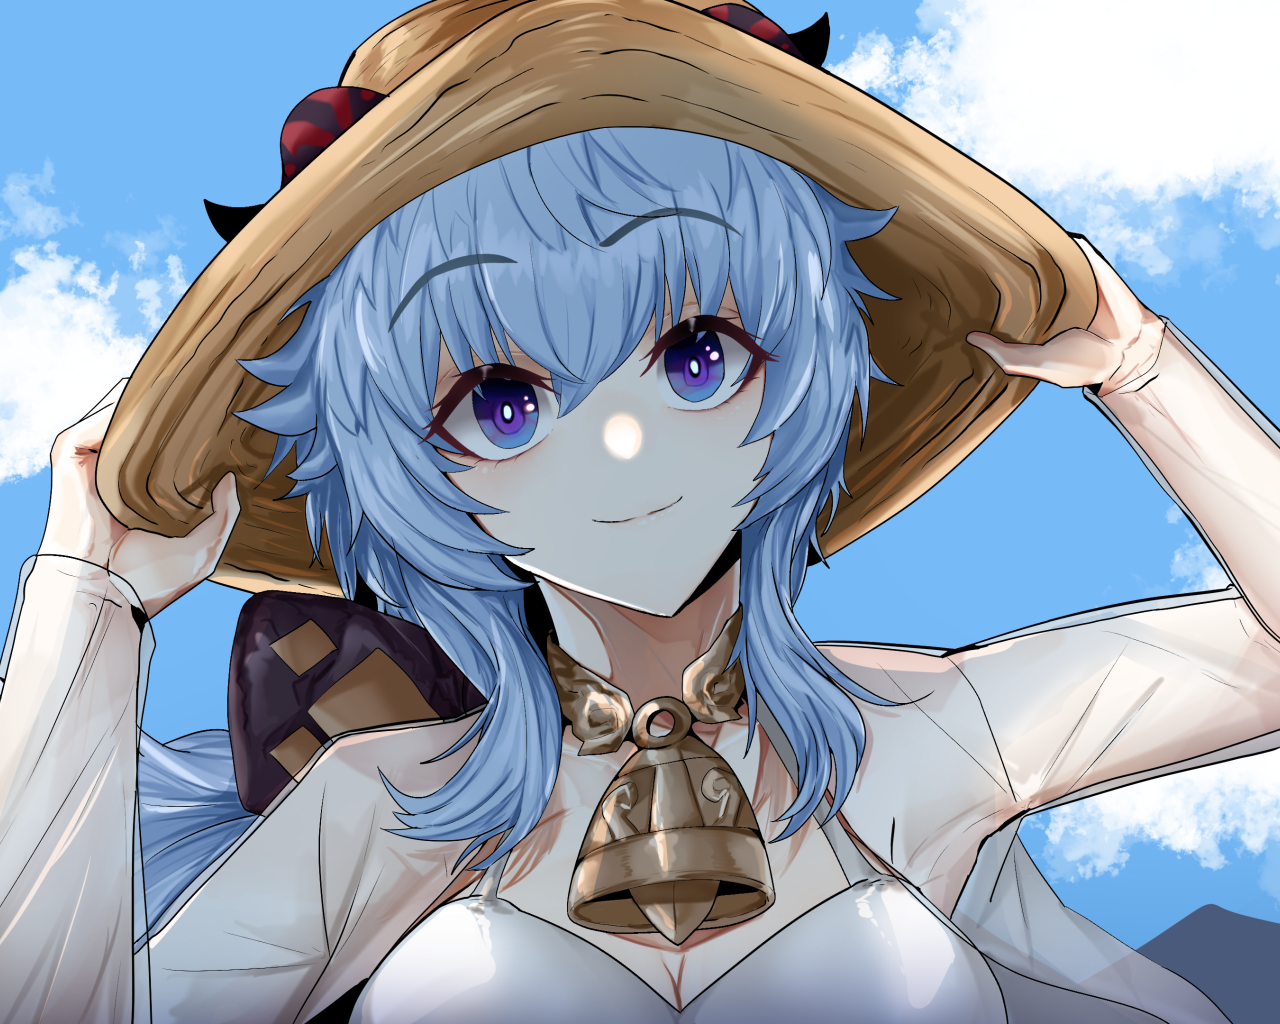 Anime girl with blue hair wearing a hat